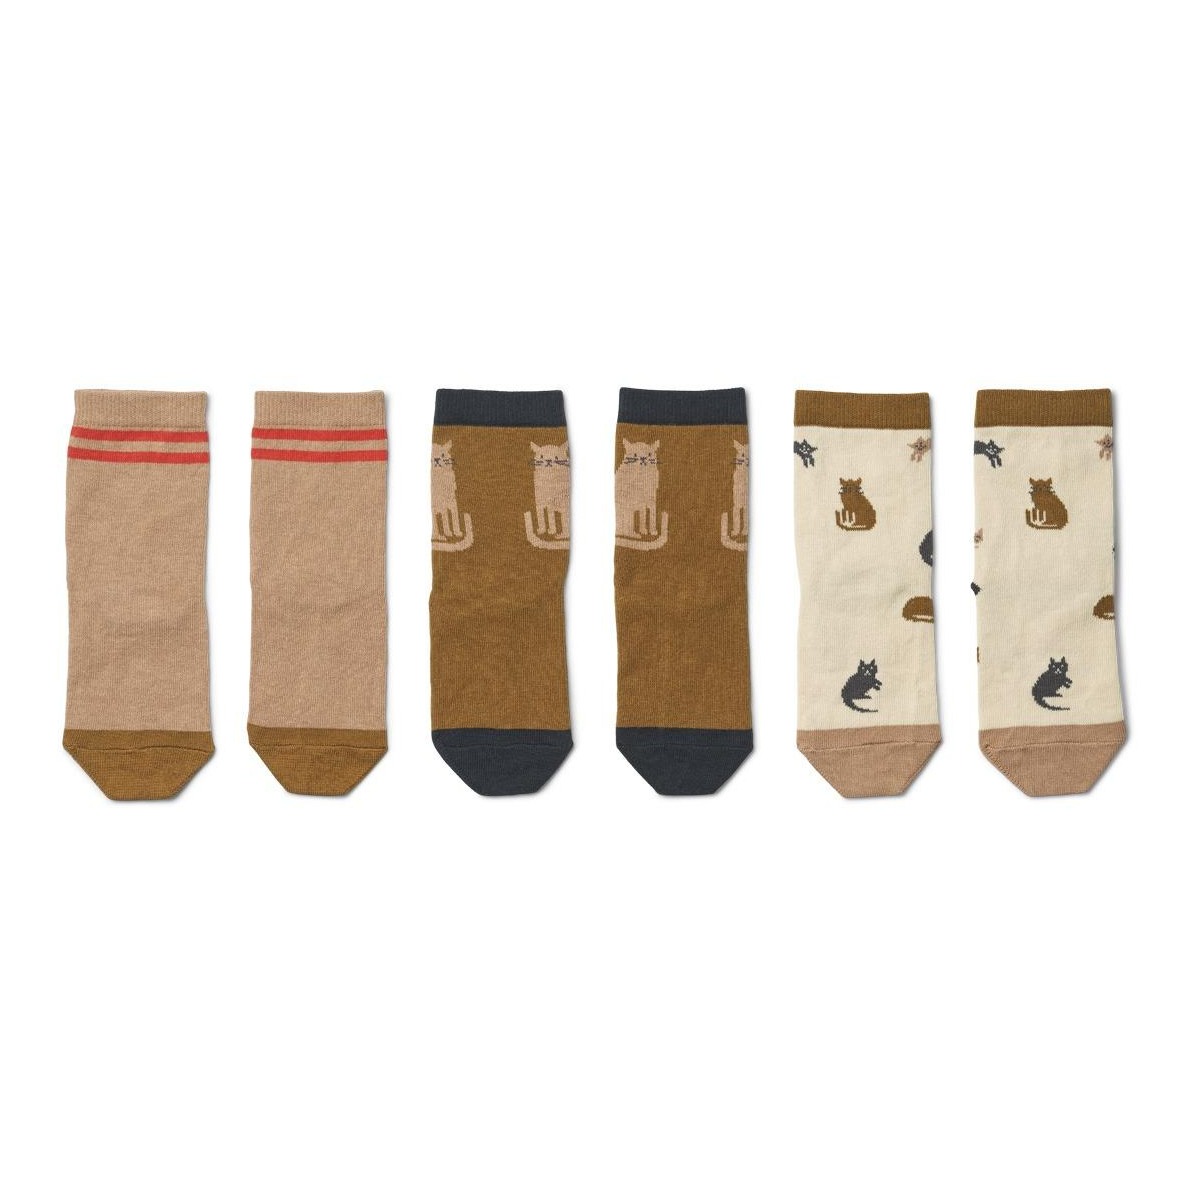 Calcetines Silas Miauw apple blossom 3 pack de Liewood